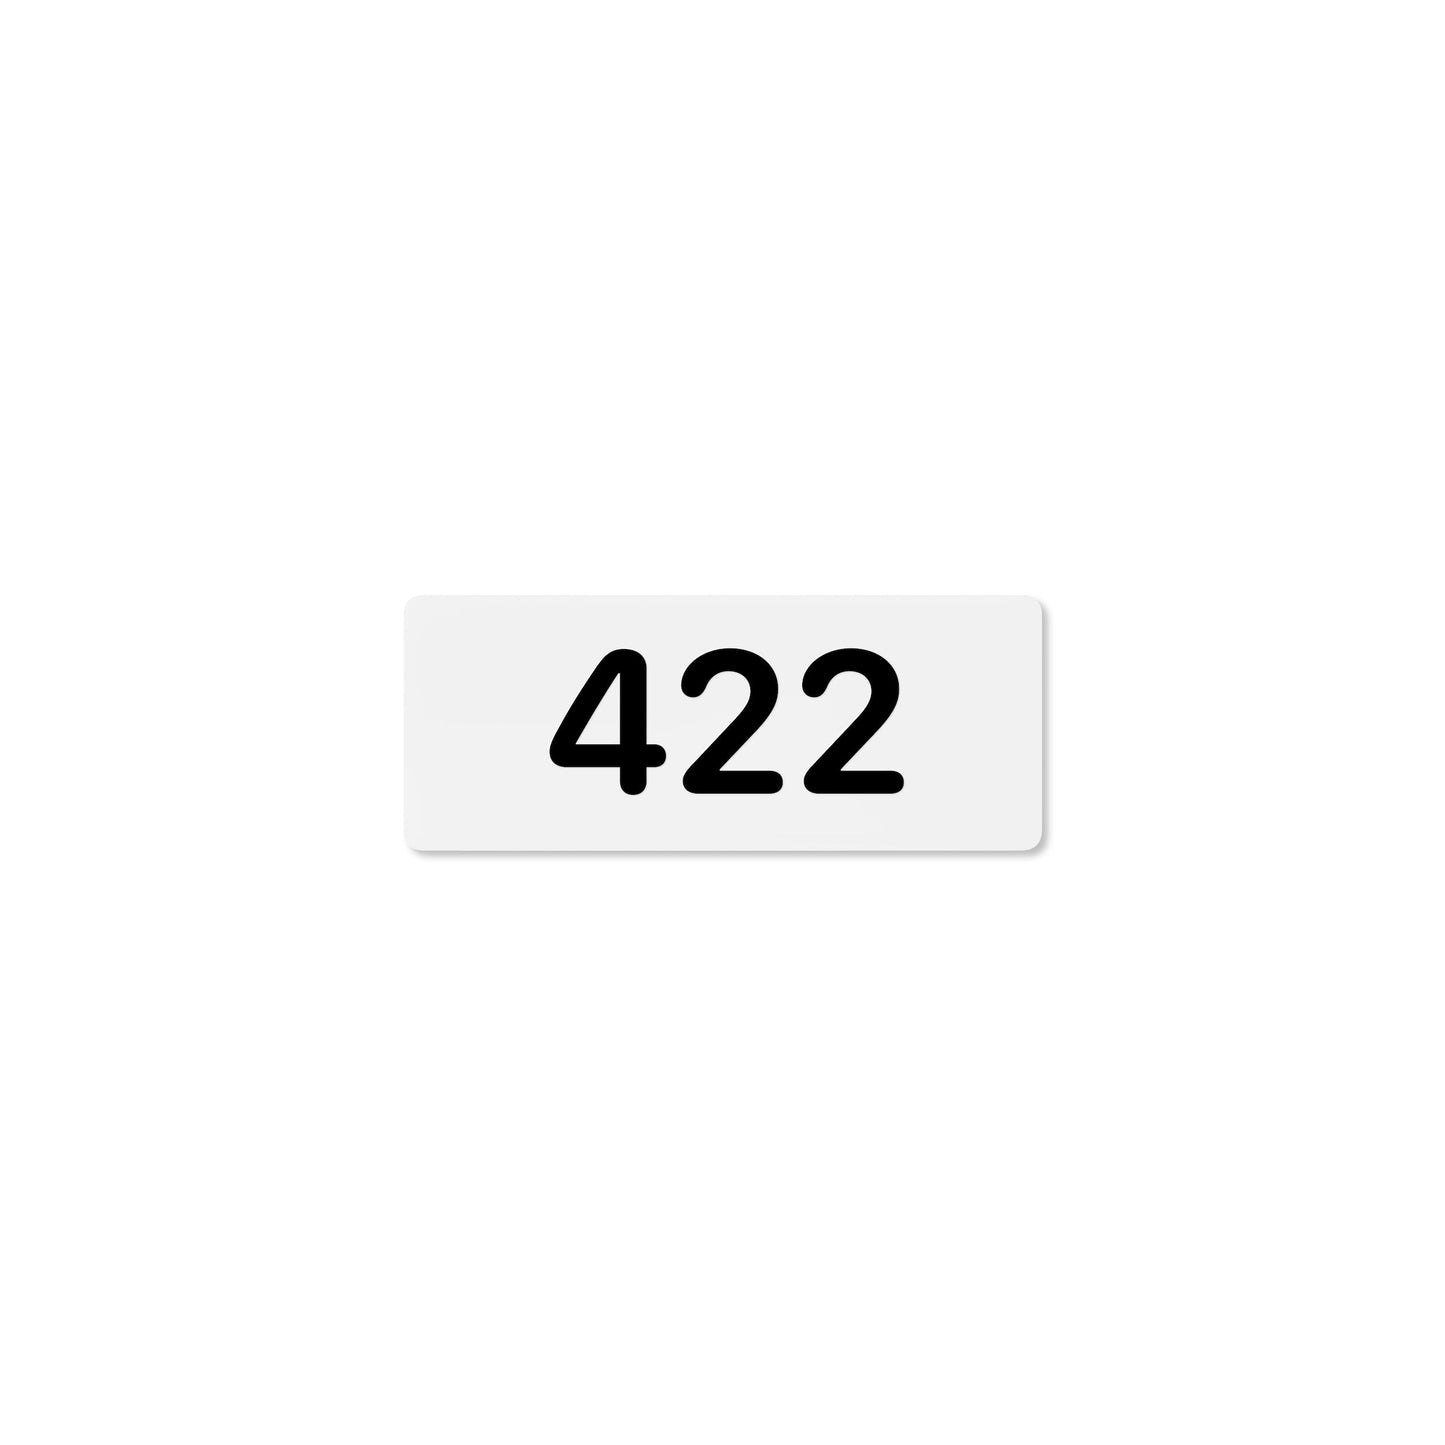 Numeral 422